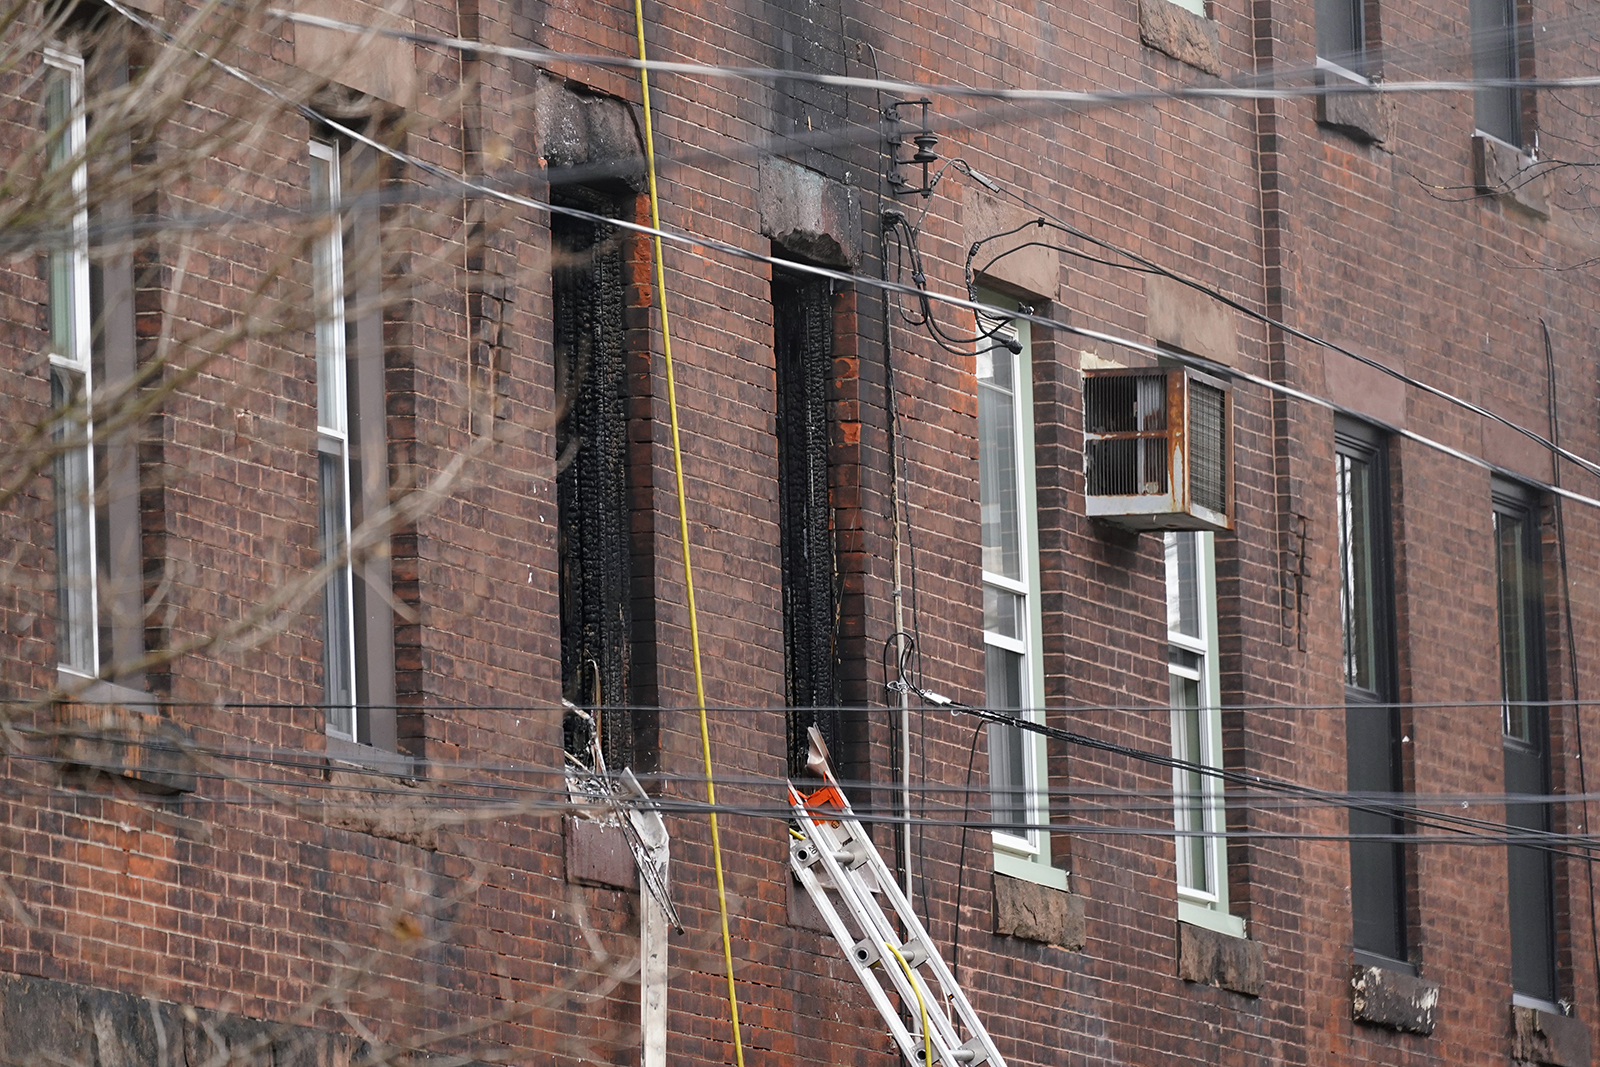 Fire damaged windows are seen at the scene of a deadly row house fire on Wednesday. 